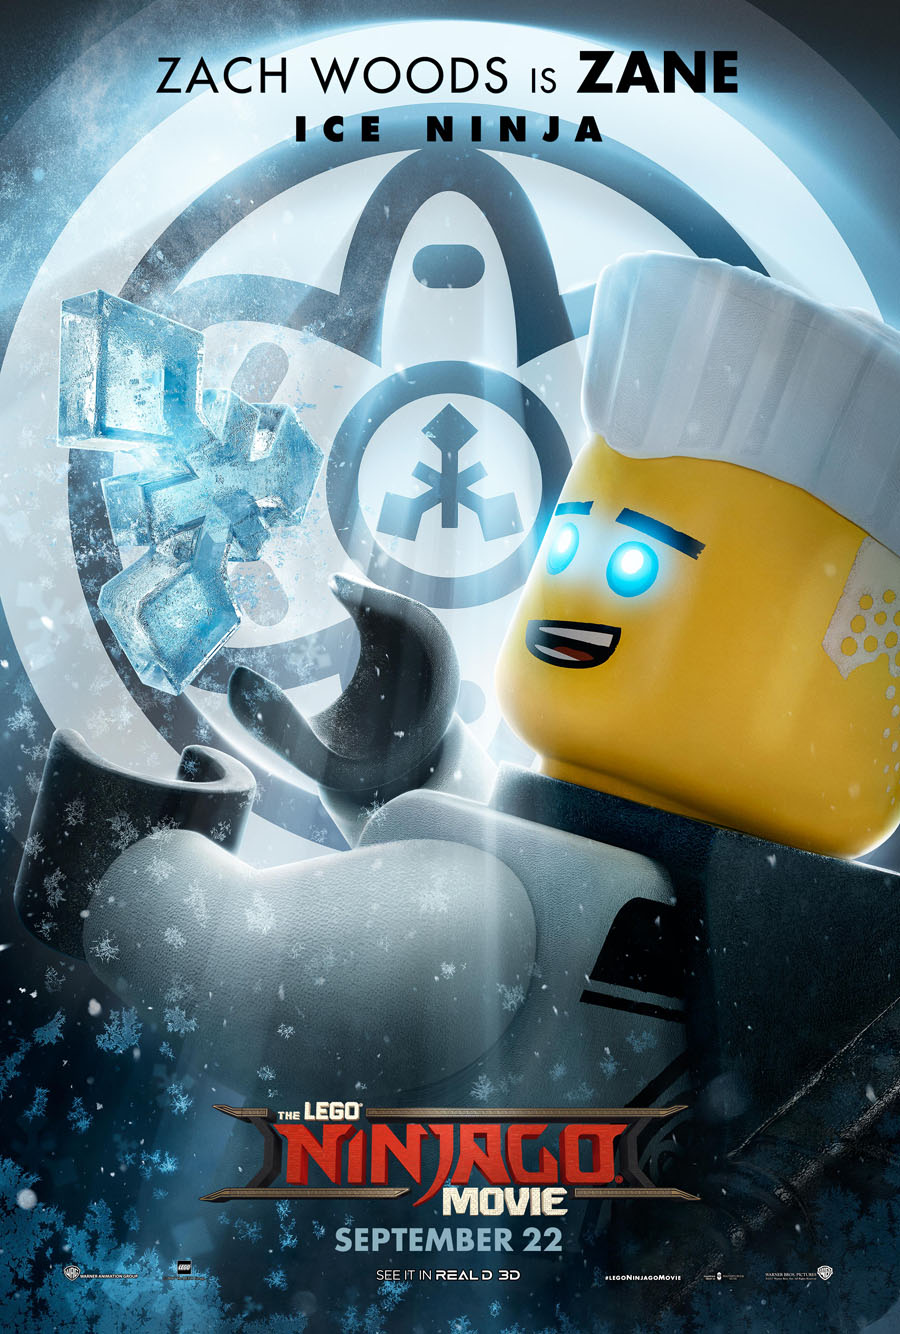 Brickfinder - The LEGO Batman Movie Character Poster Images